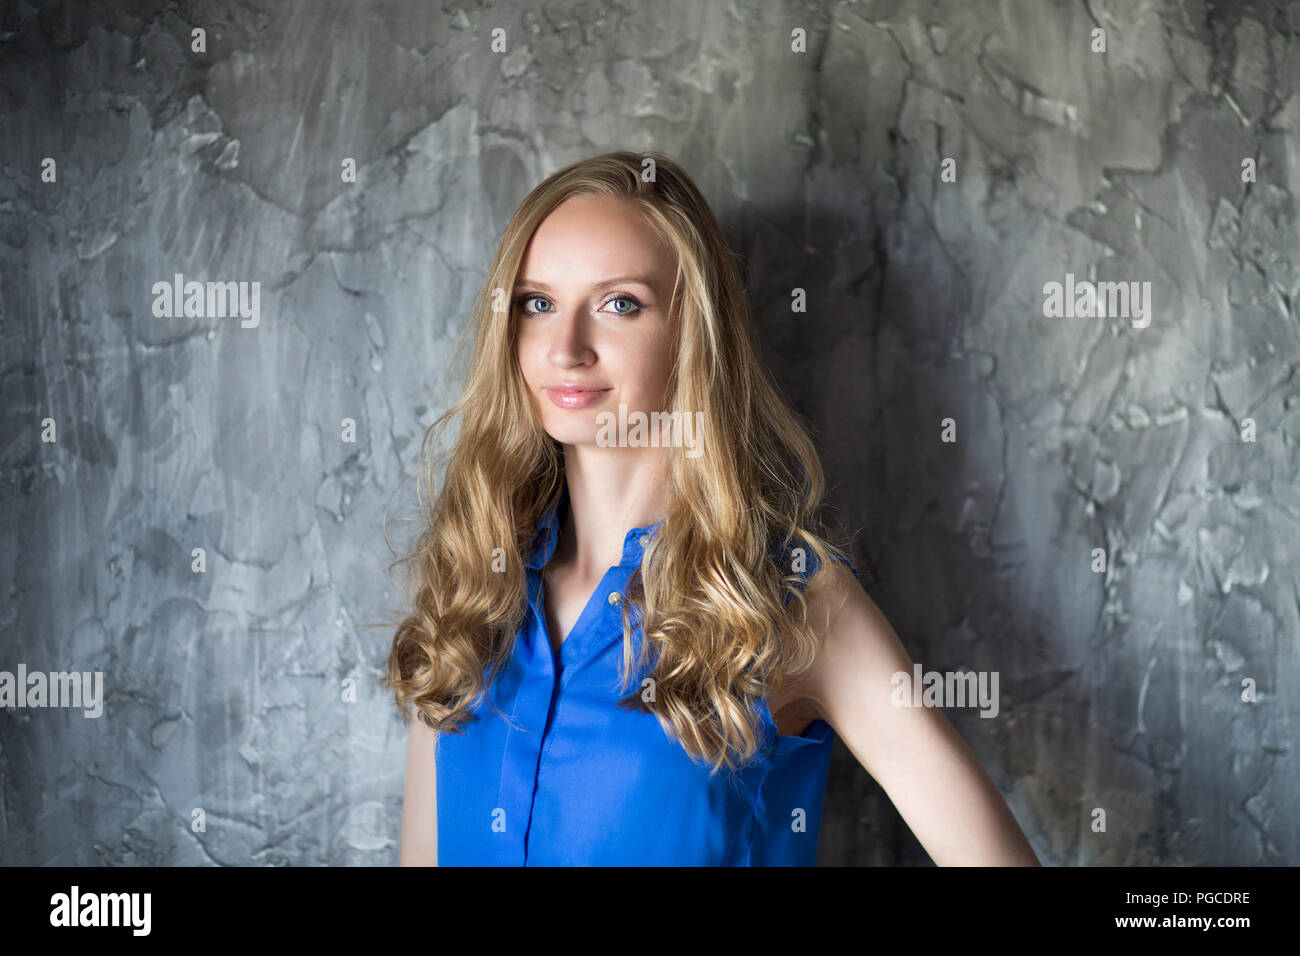 Portrait of the blonde woman in blue blouse staying in front of dark wall and keep smiling Stock Photo